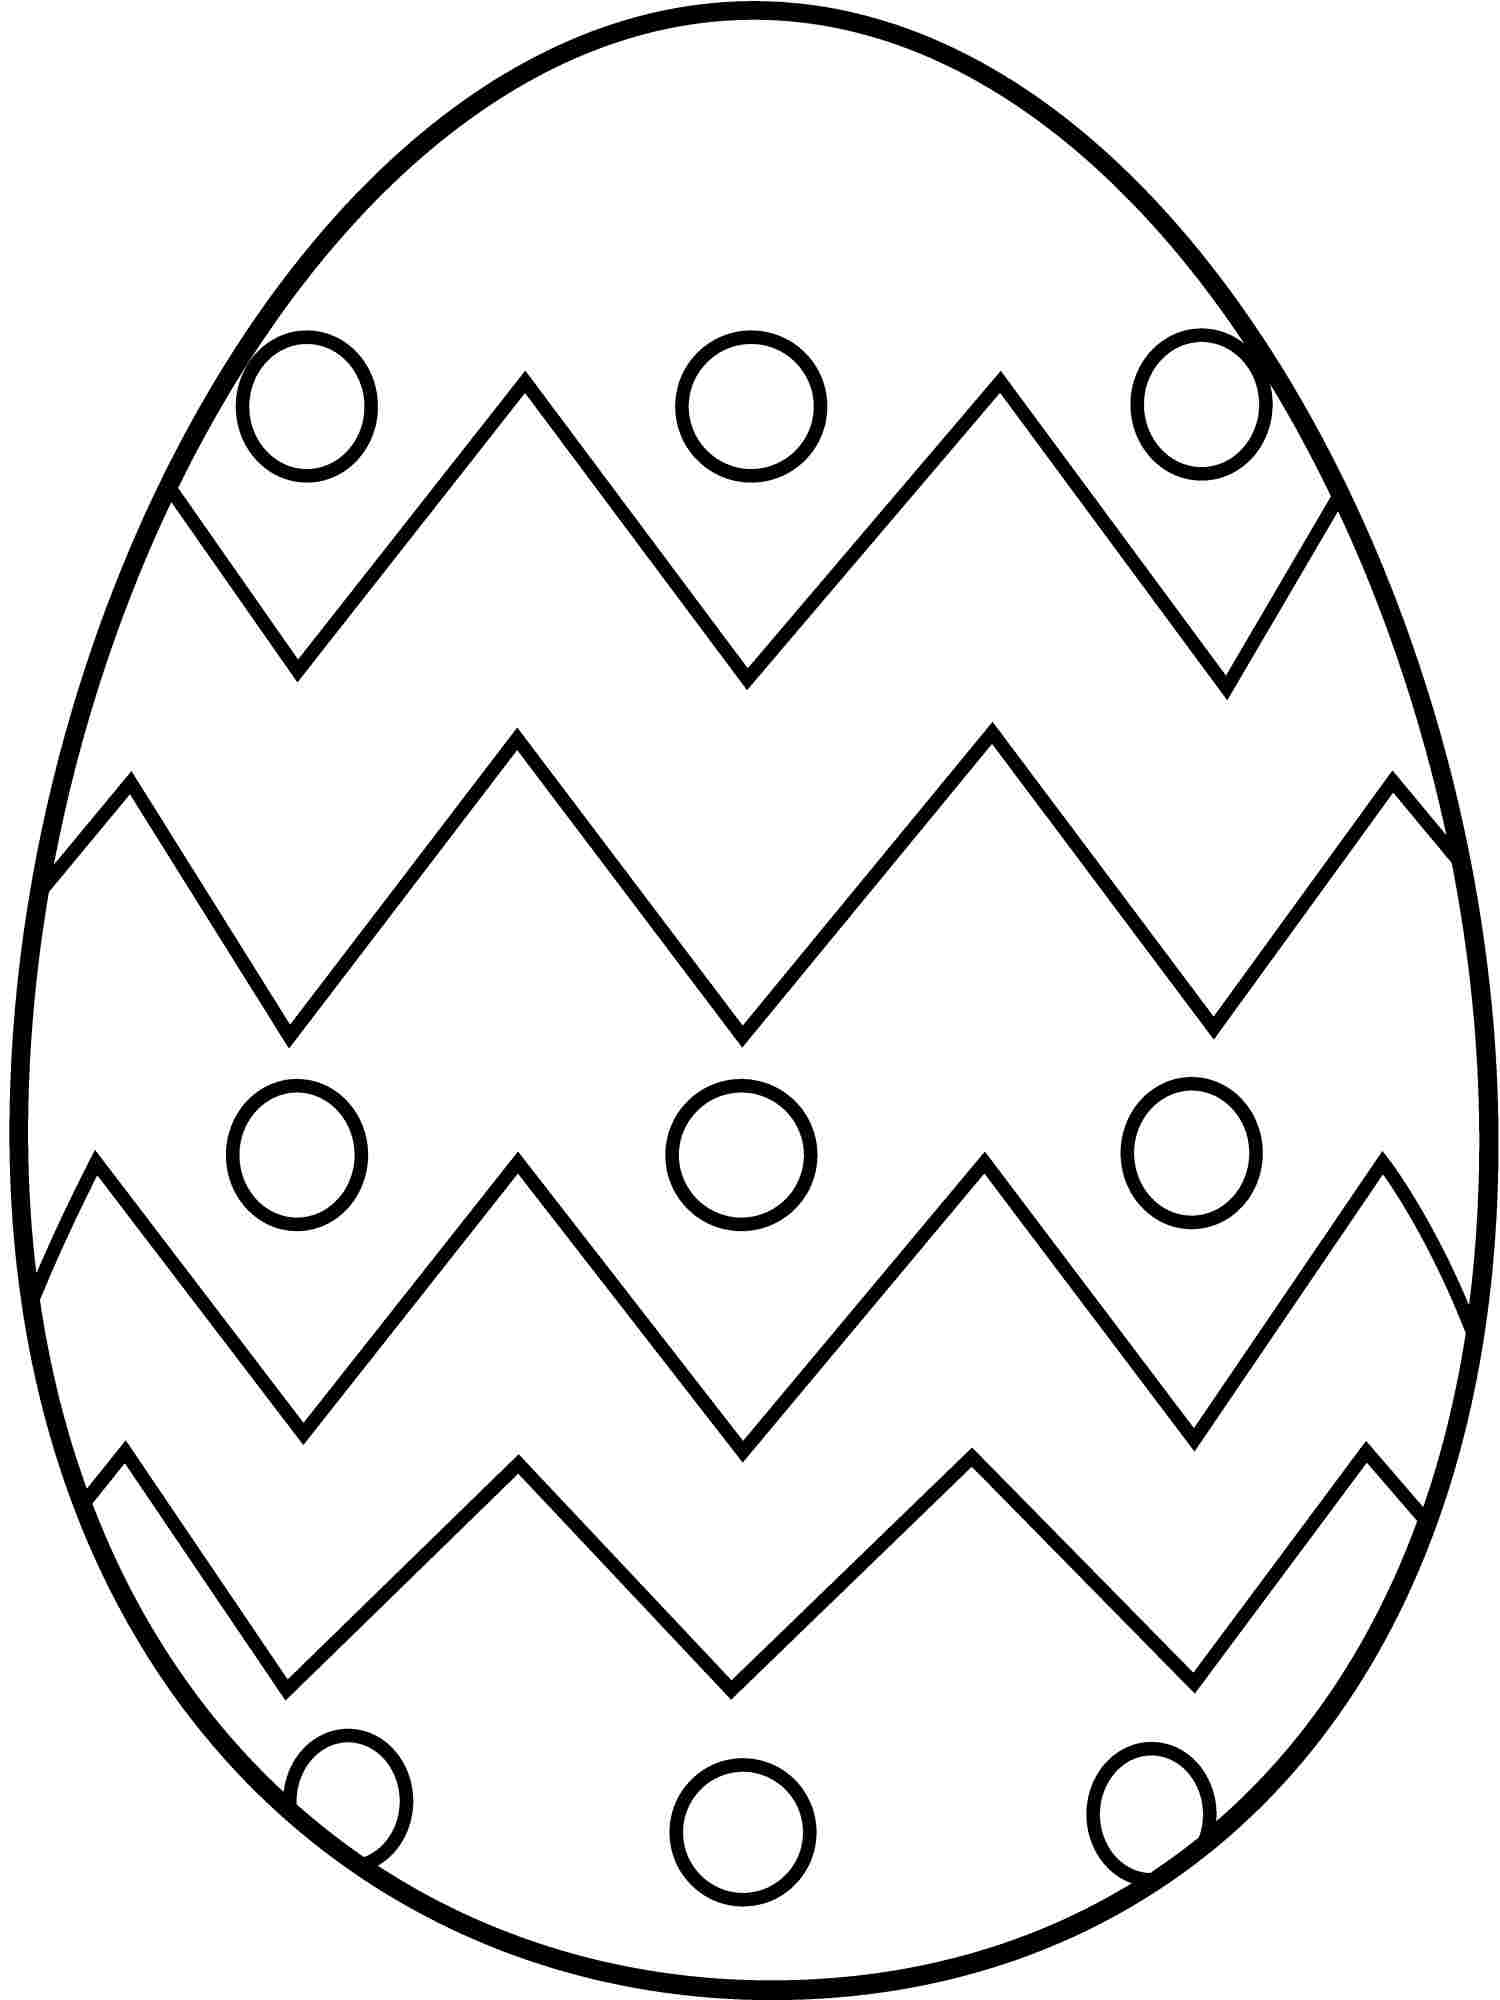 Large Easter Egg Coloring Pages at GetColorings.com | Free printable